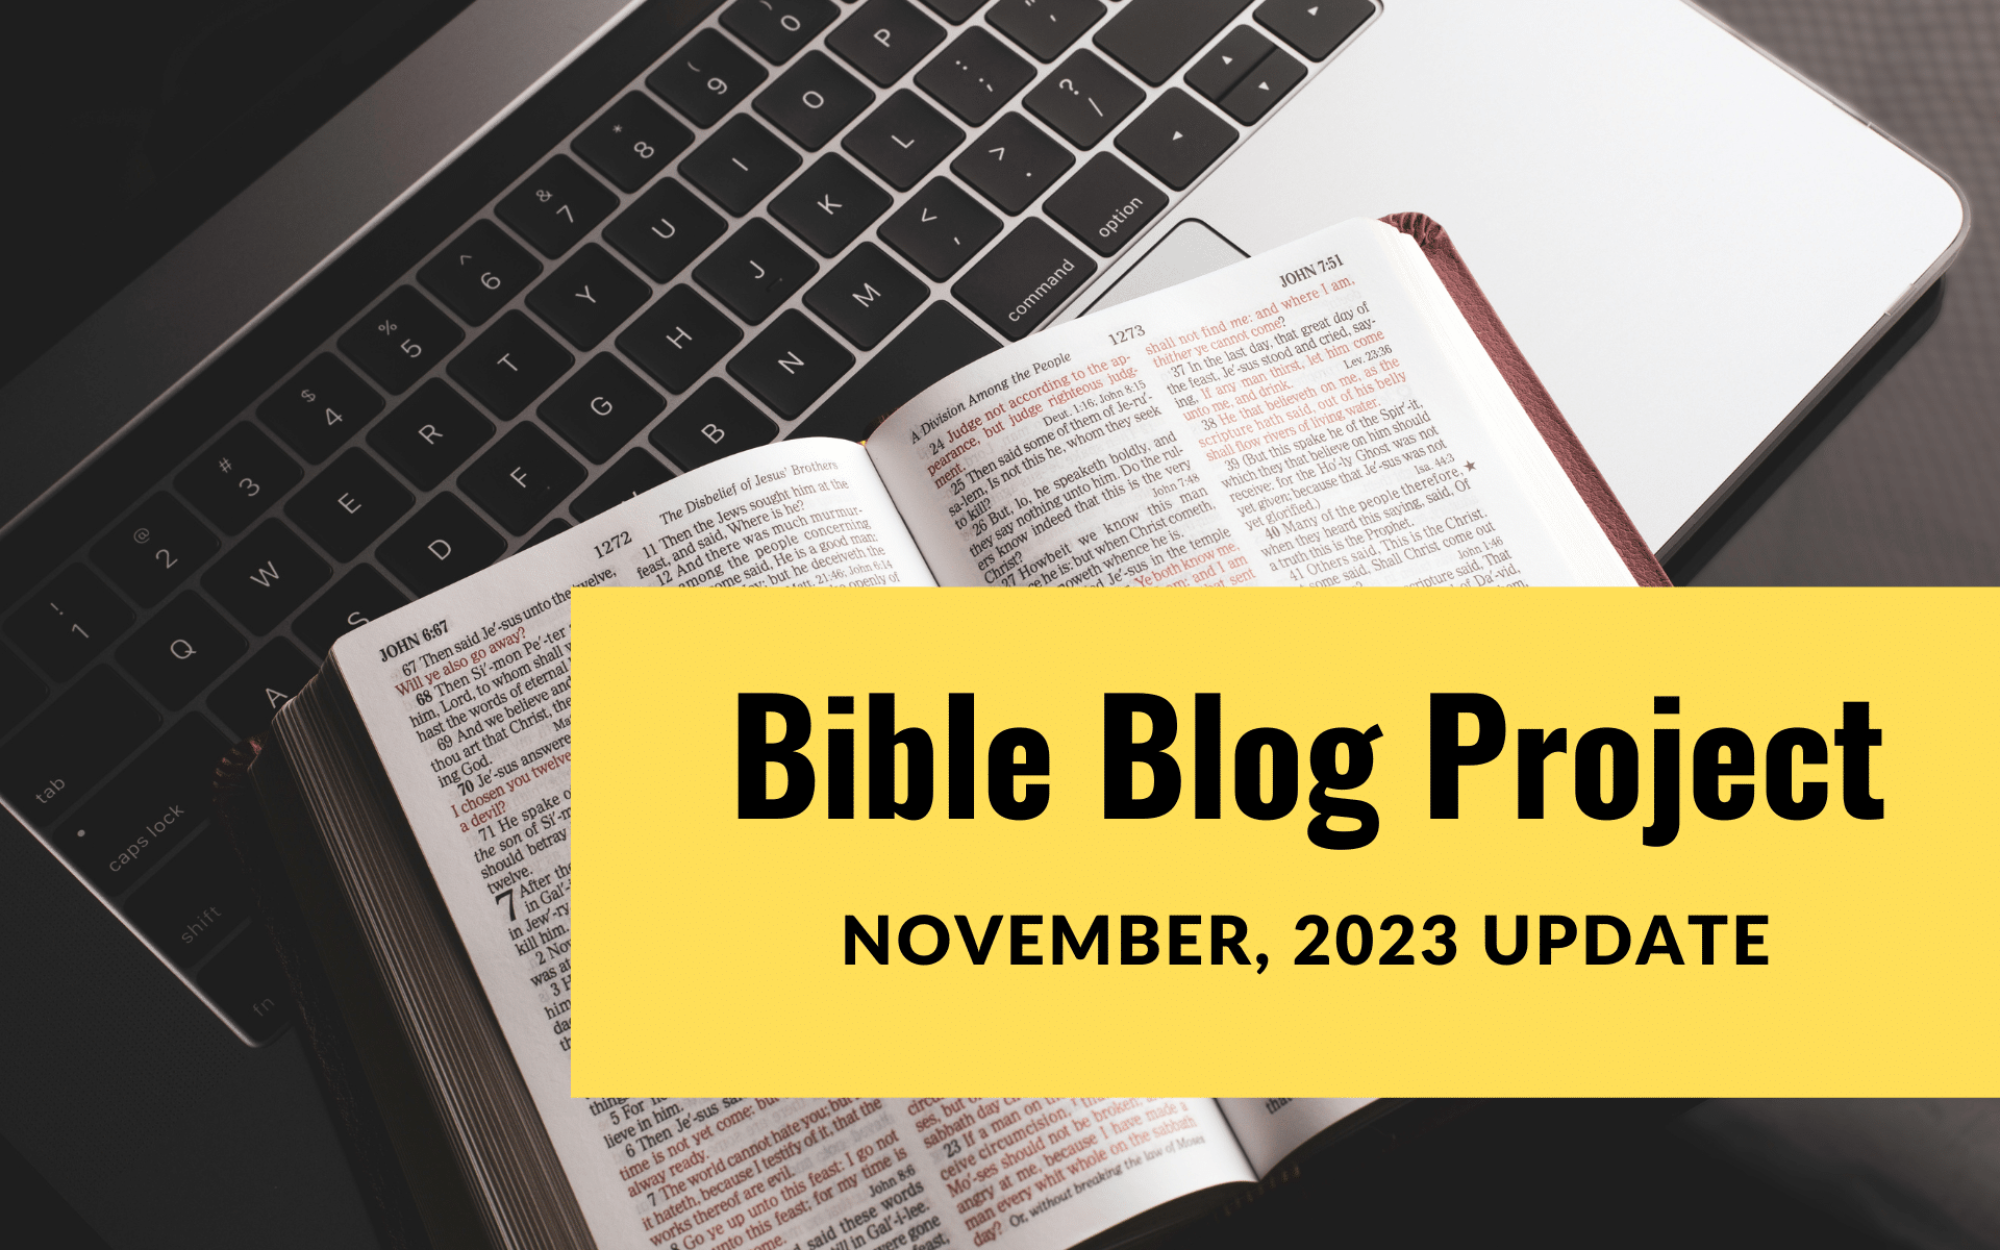 Bible blog project update 1